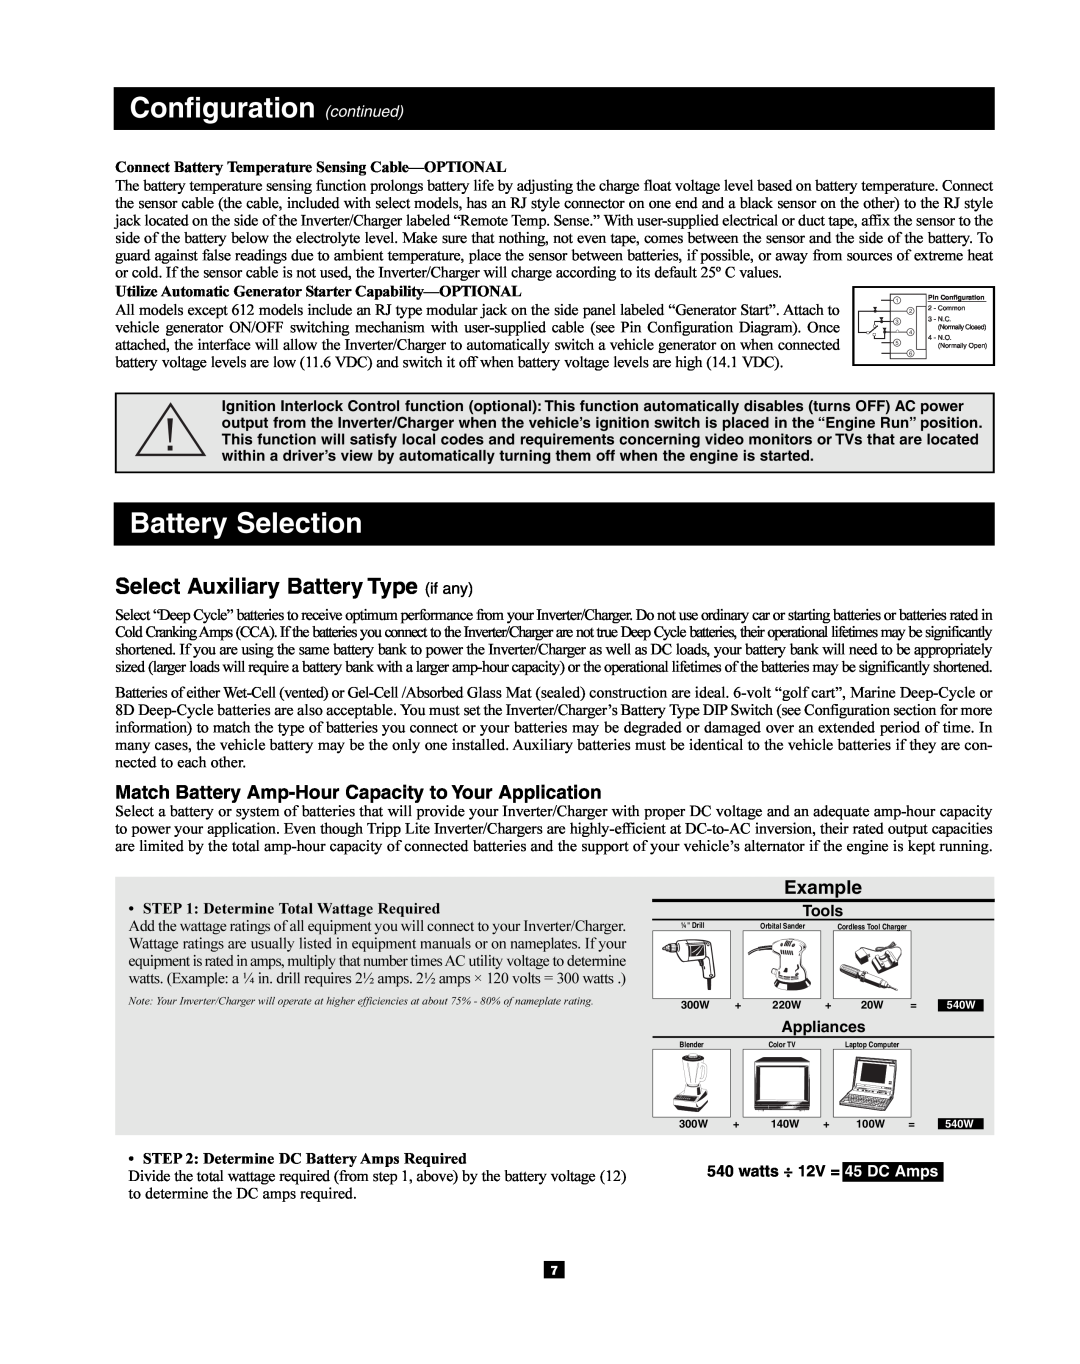 Tripp Lite 200712159 Battery Selection, Select Auxiliary Battery Type if any, Example, Configuration continued, Tools 